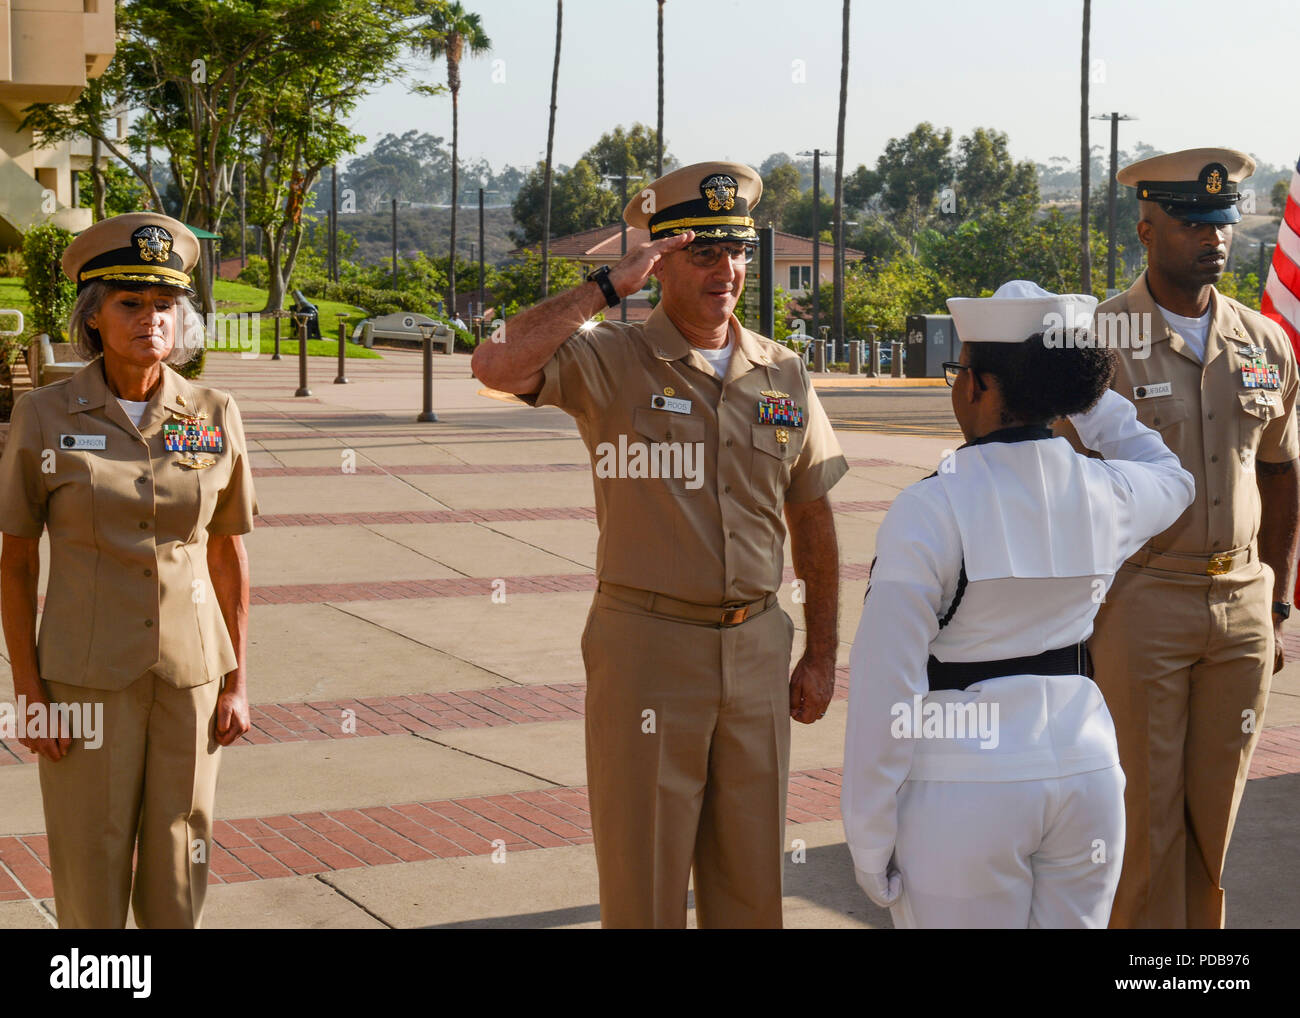 180803-N-PN275-1018 SAN DIEGO (August 03, 2018) Capt. Joel Roos, commanding officer of Naval Medical Center San Diego (NMCSD), returns a salute to Hospital Corpsman 3rd Class Kirsten Austin, during an awards ceremony. NMCSD recognized eight Sailors during the ceremony for their achievements. (U.S. Navy Photo by Mass Communication Specialist 2nd Class Zach Kreitzer) Stock Photo